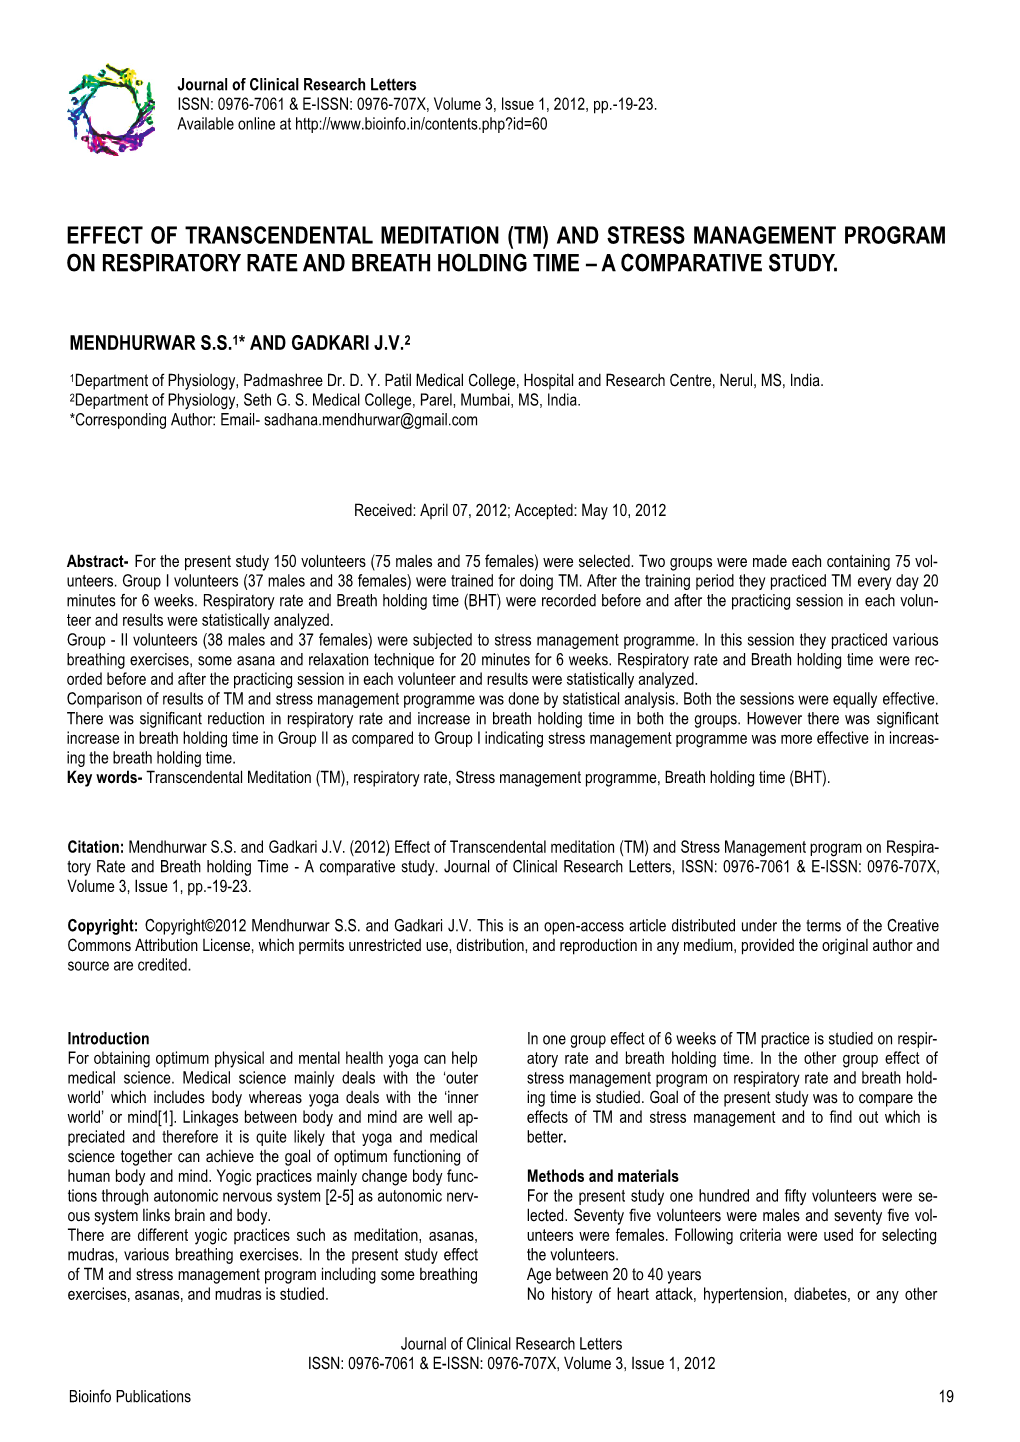 (Tm) and Stress Management Program on Respiratory Rate and Breath Holding Time – a Comparative Study